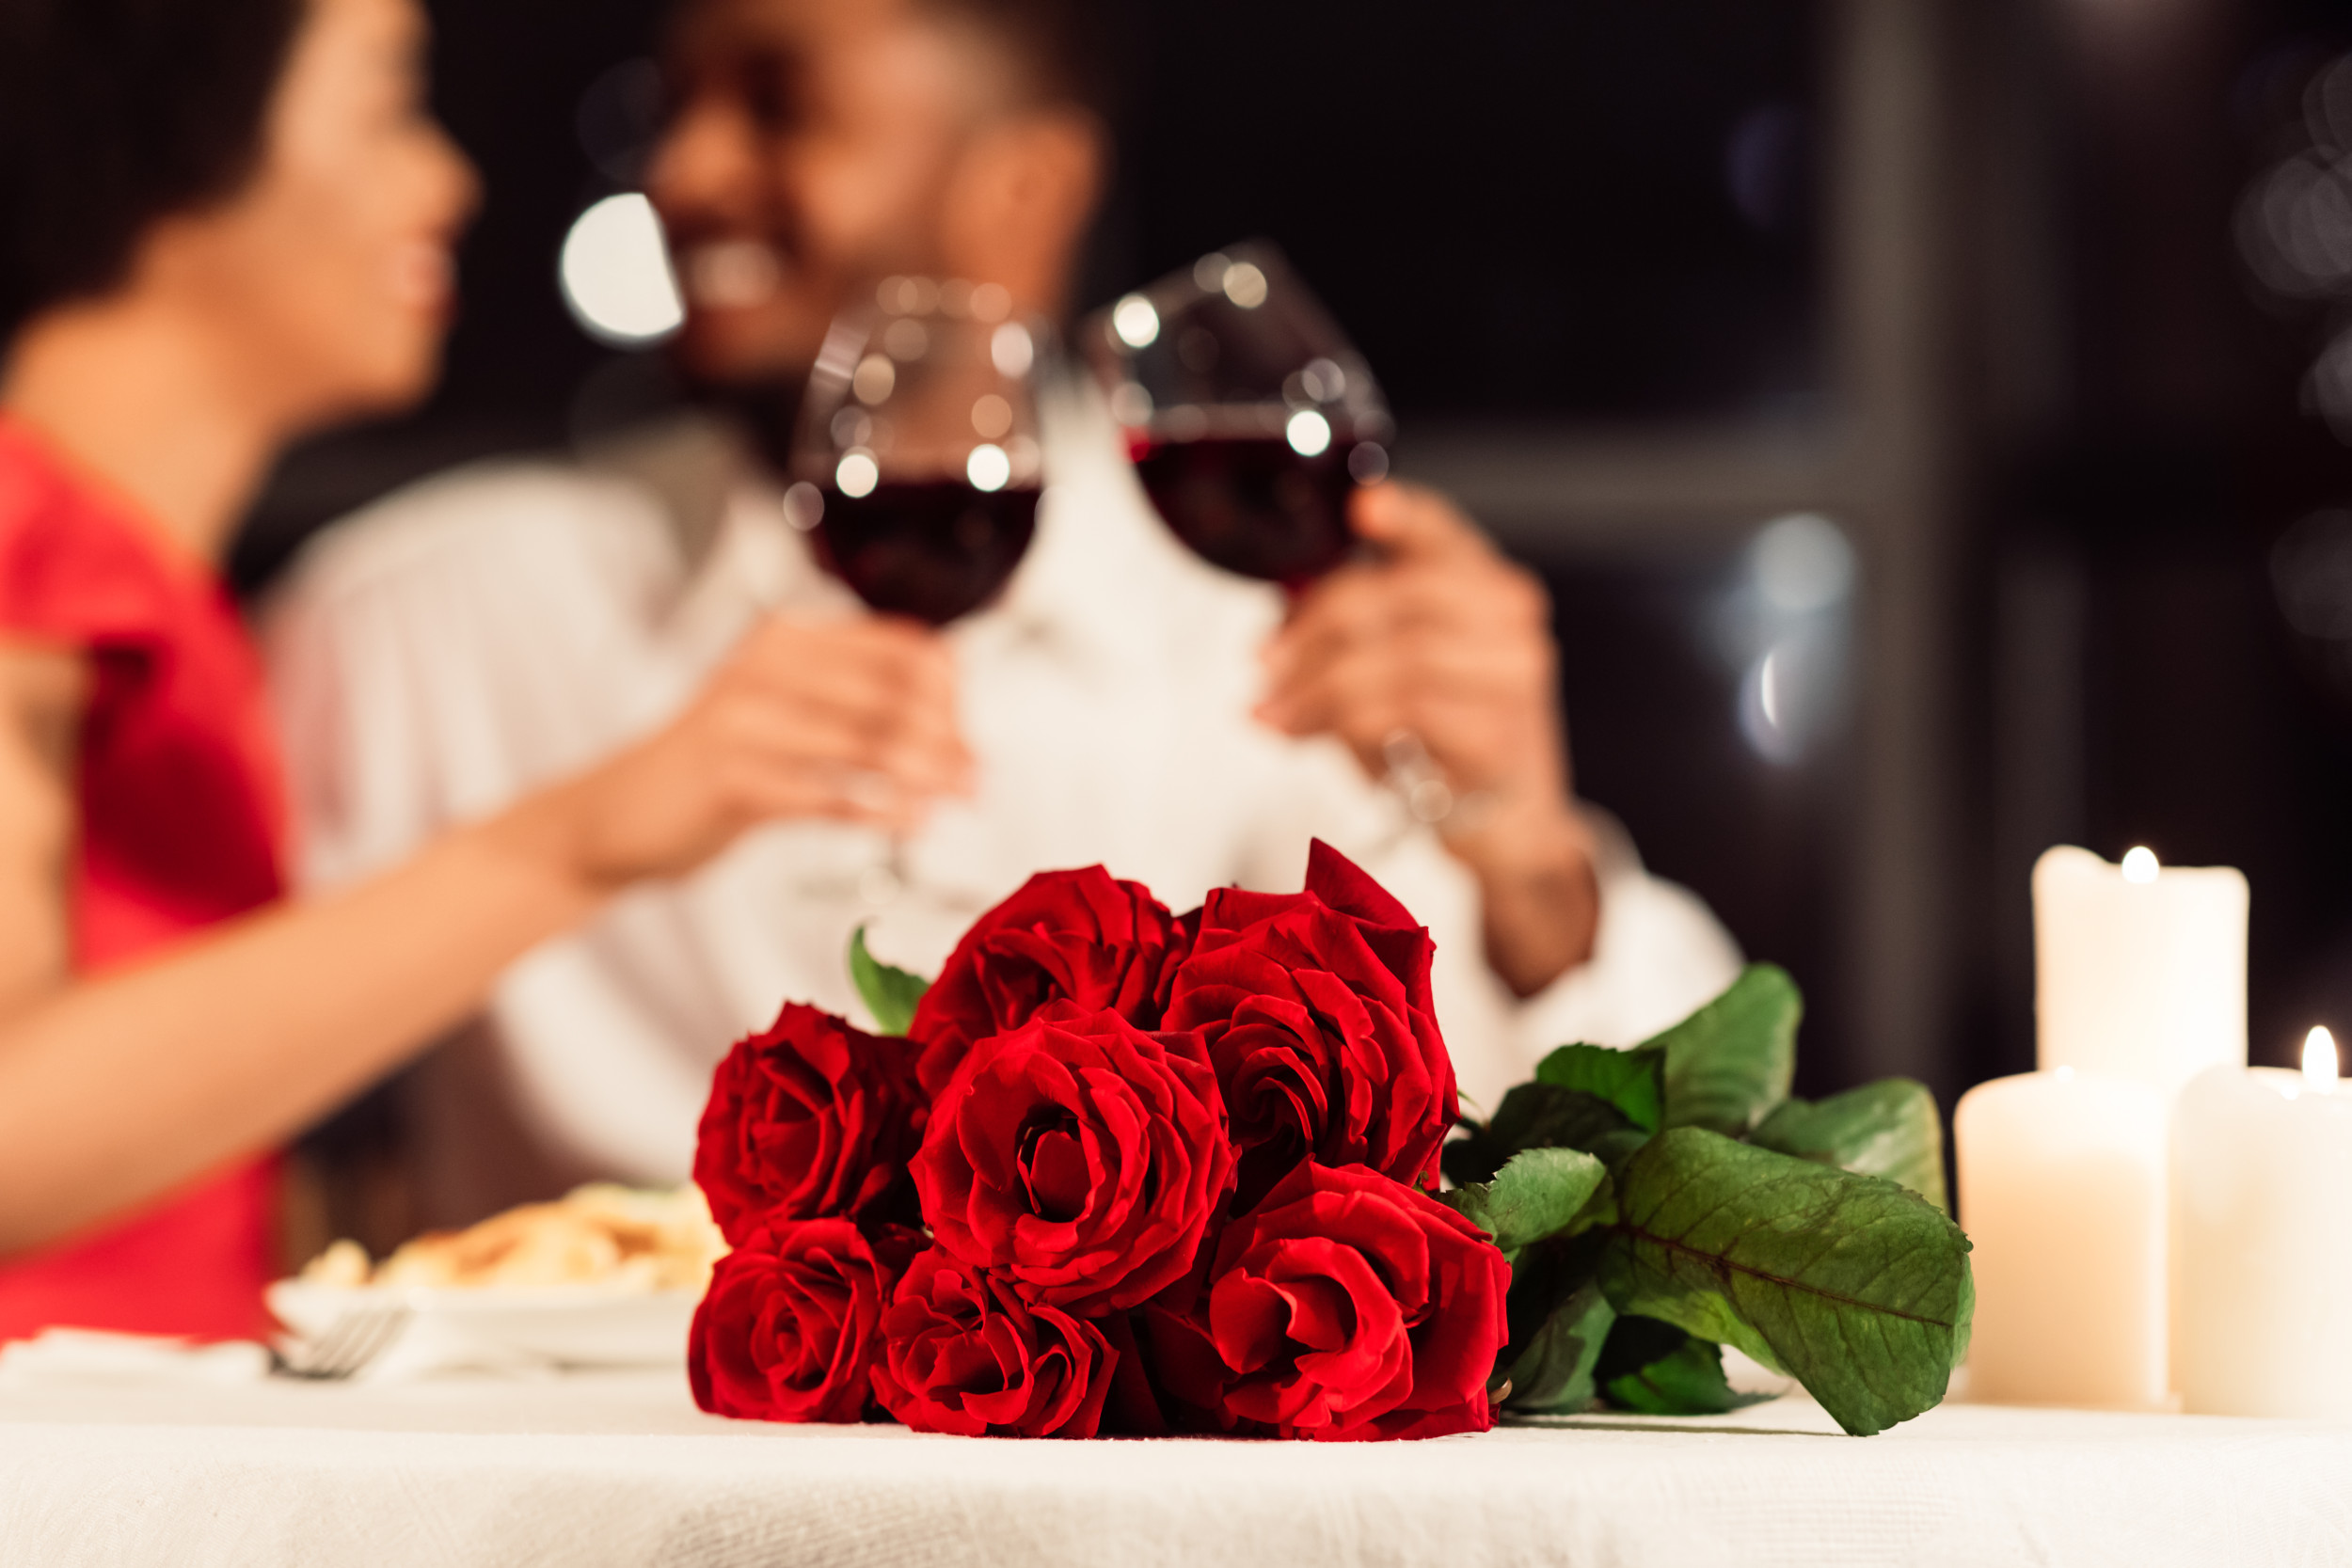 Valentine's Day Traditions Why Chocolates, Roses and Cards Are Important